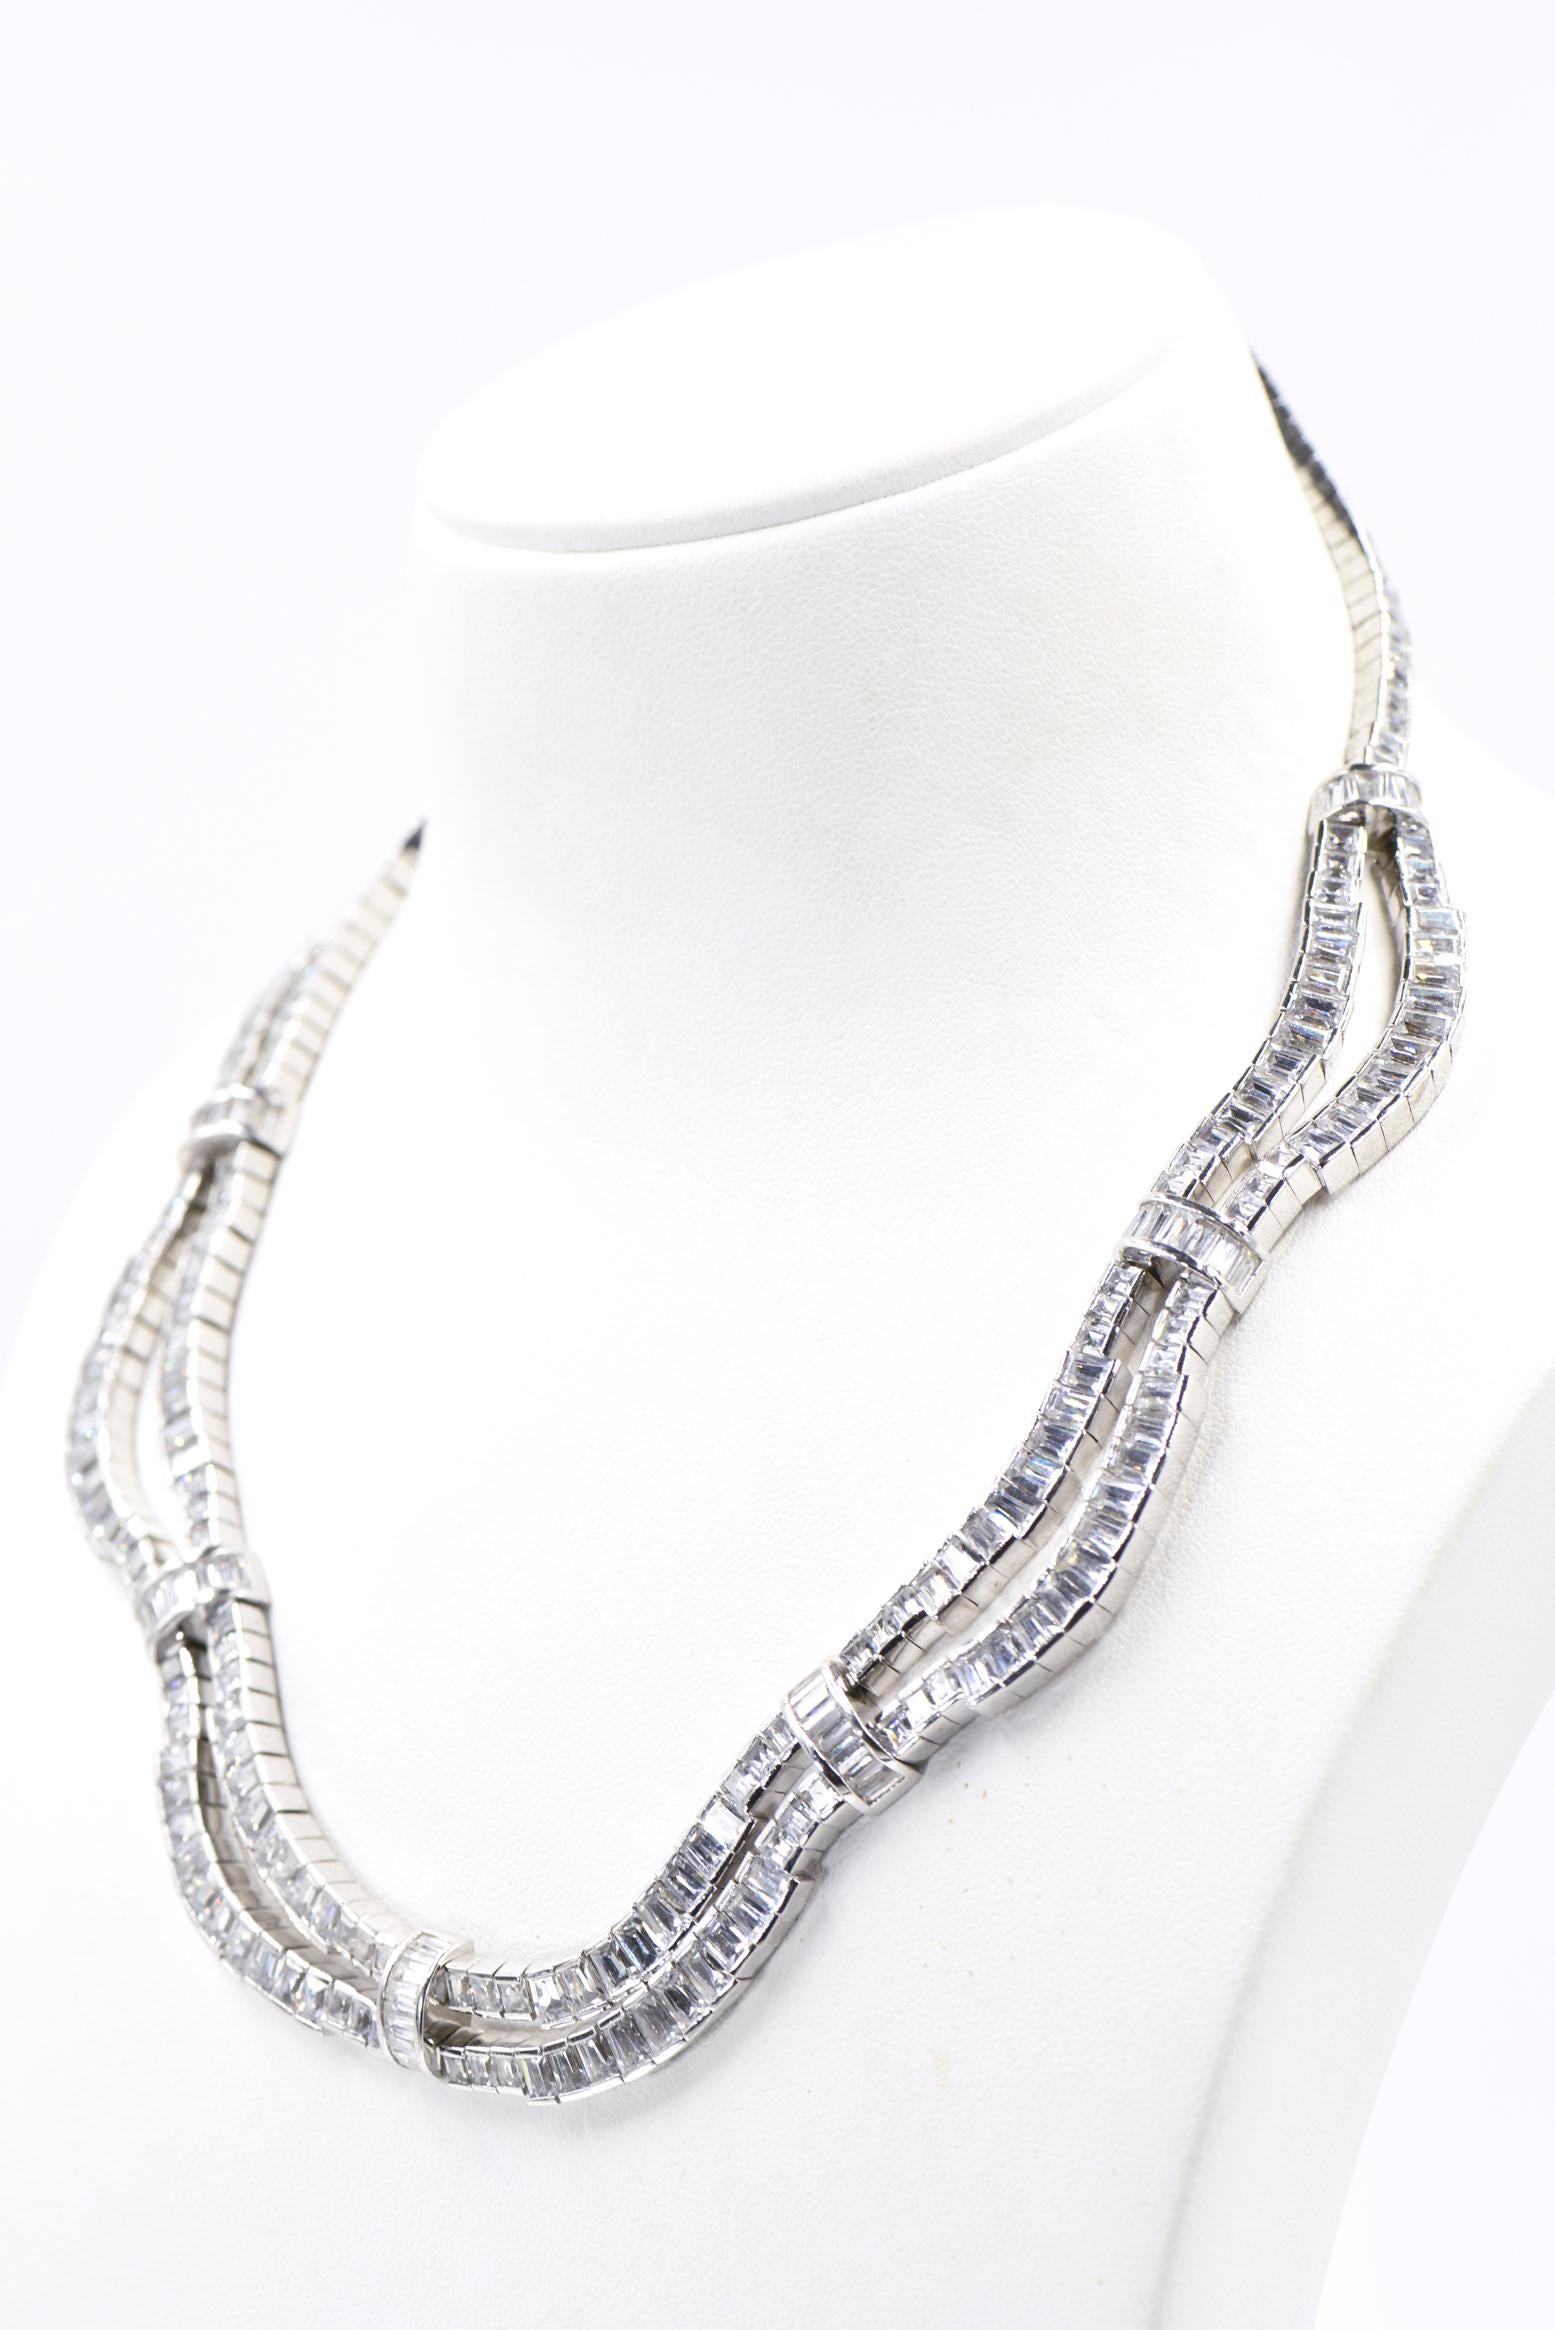 Red Carpet Drape Emerald Cut CZ Sterling Silver Statement or Bridal Necklace  For Sale 3